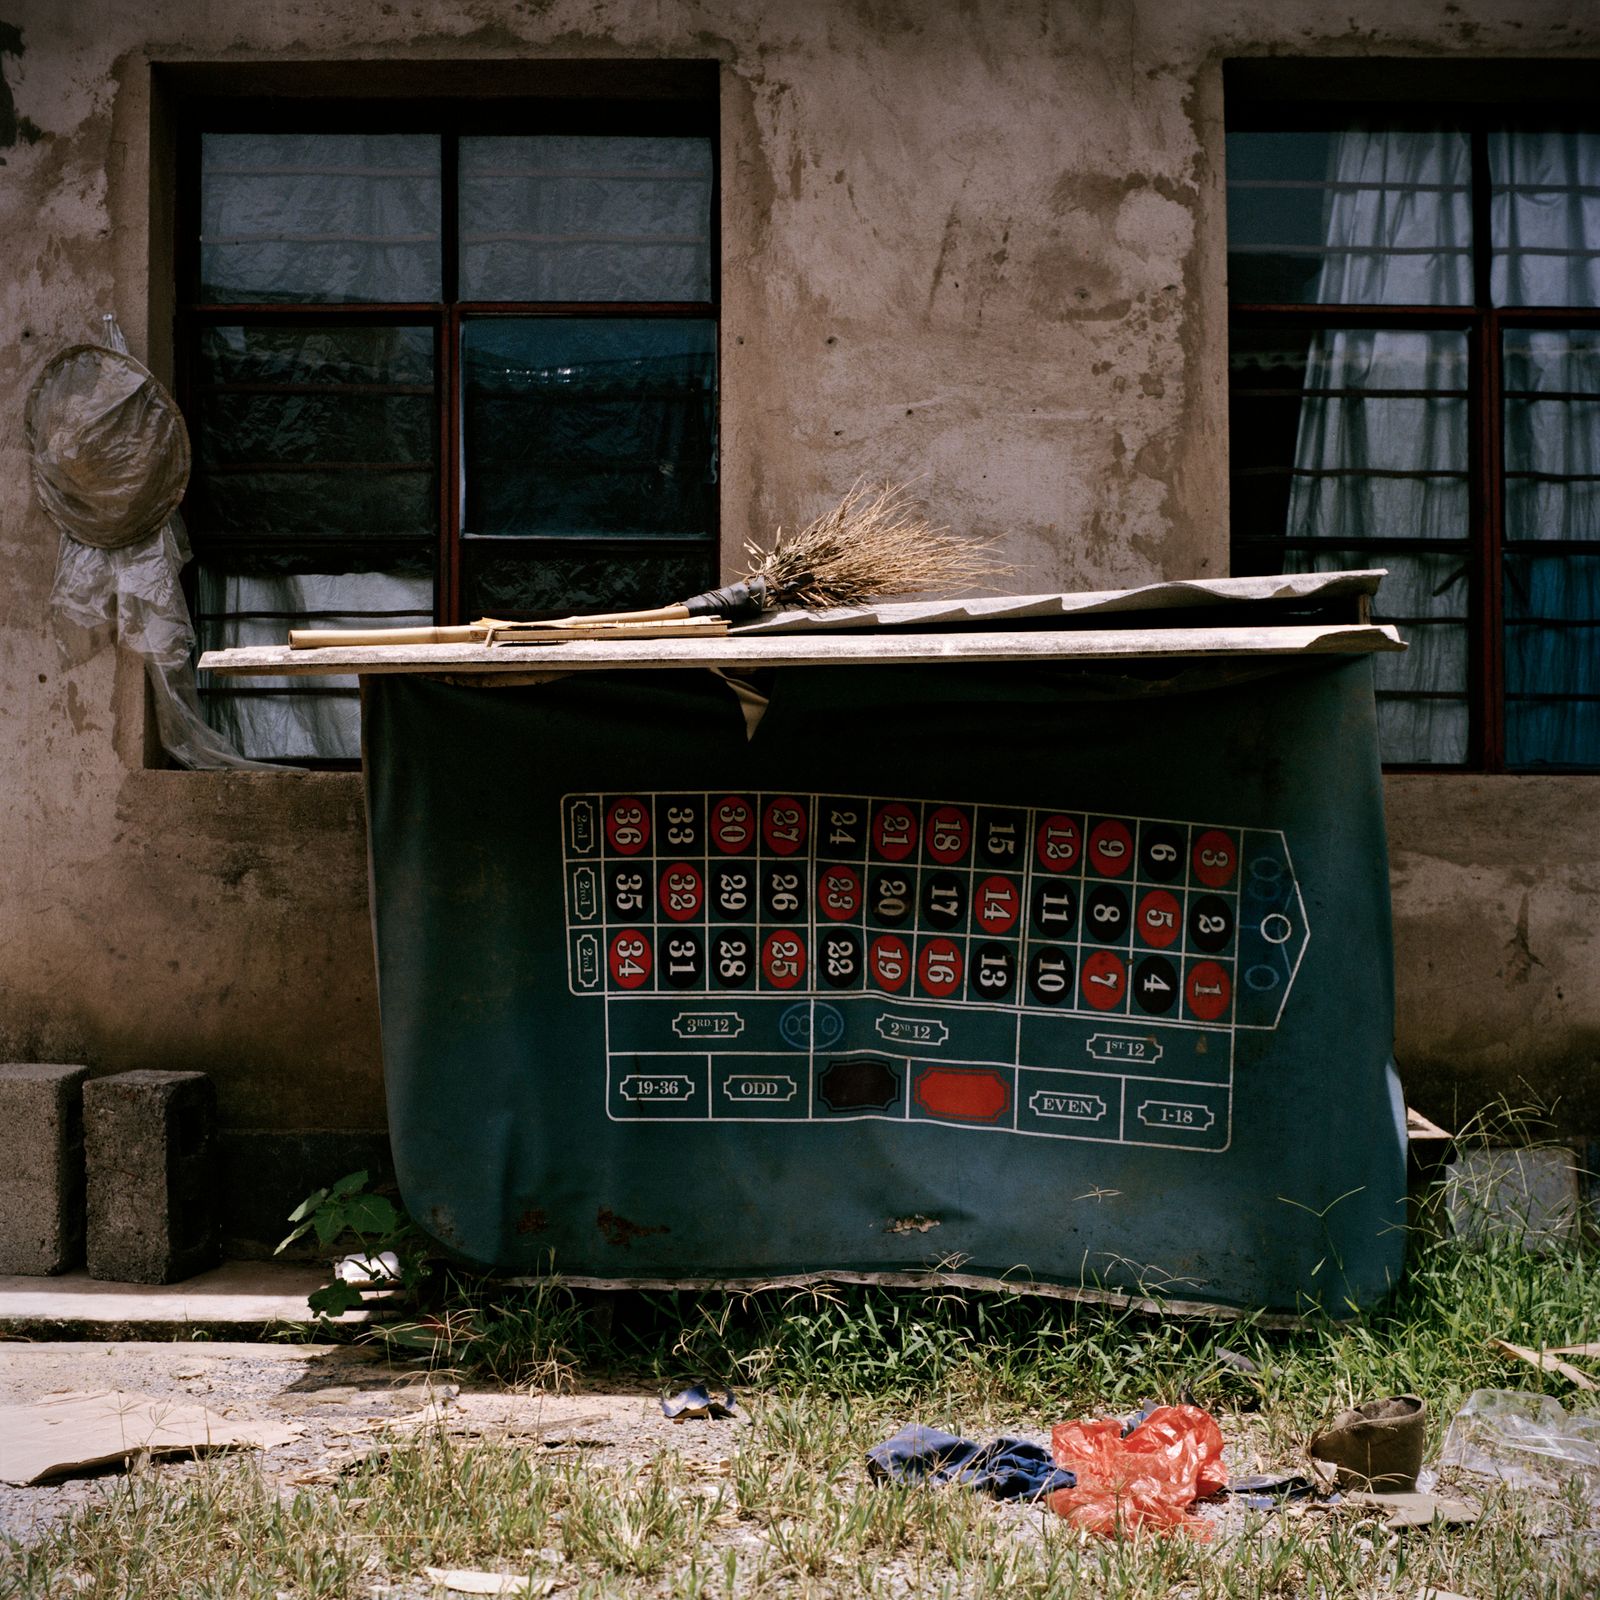 © Huiying Ore - Image from the the golden city of boten photography project